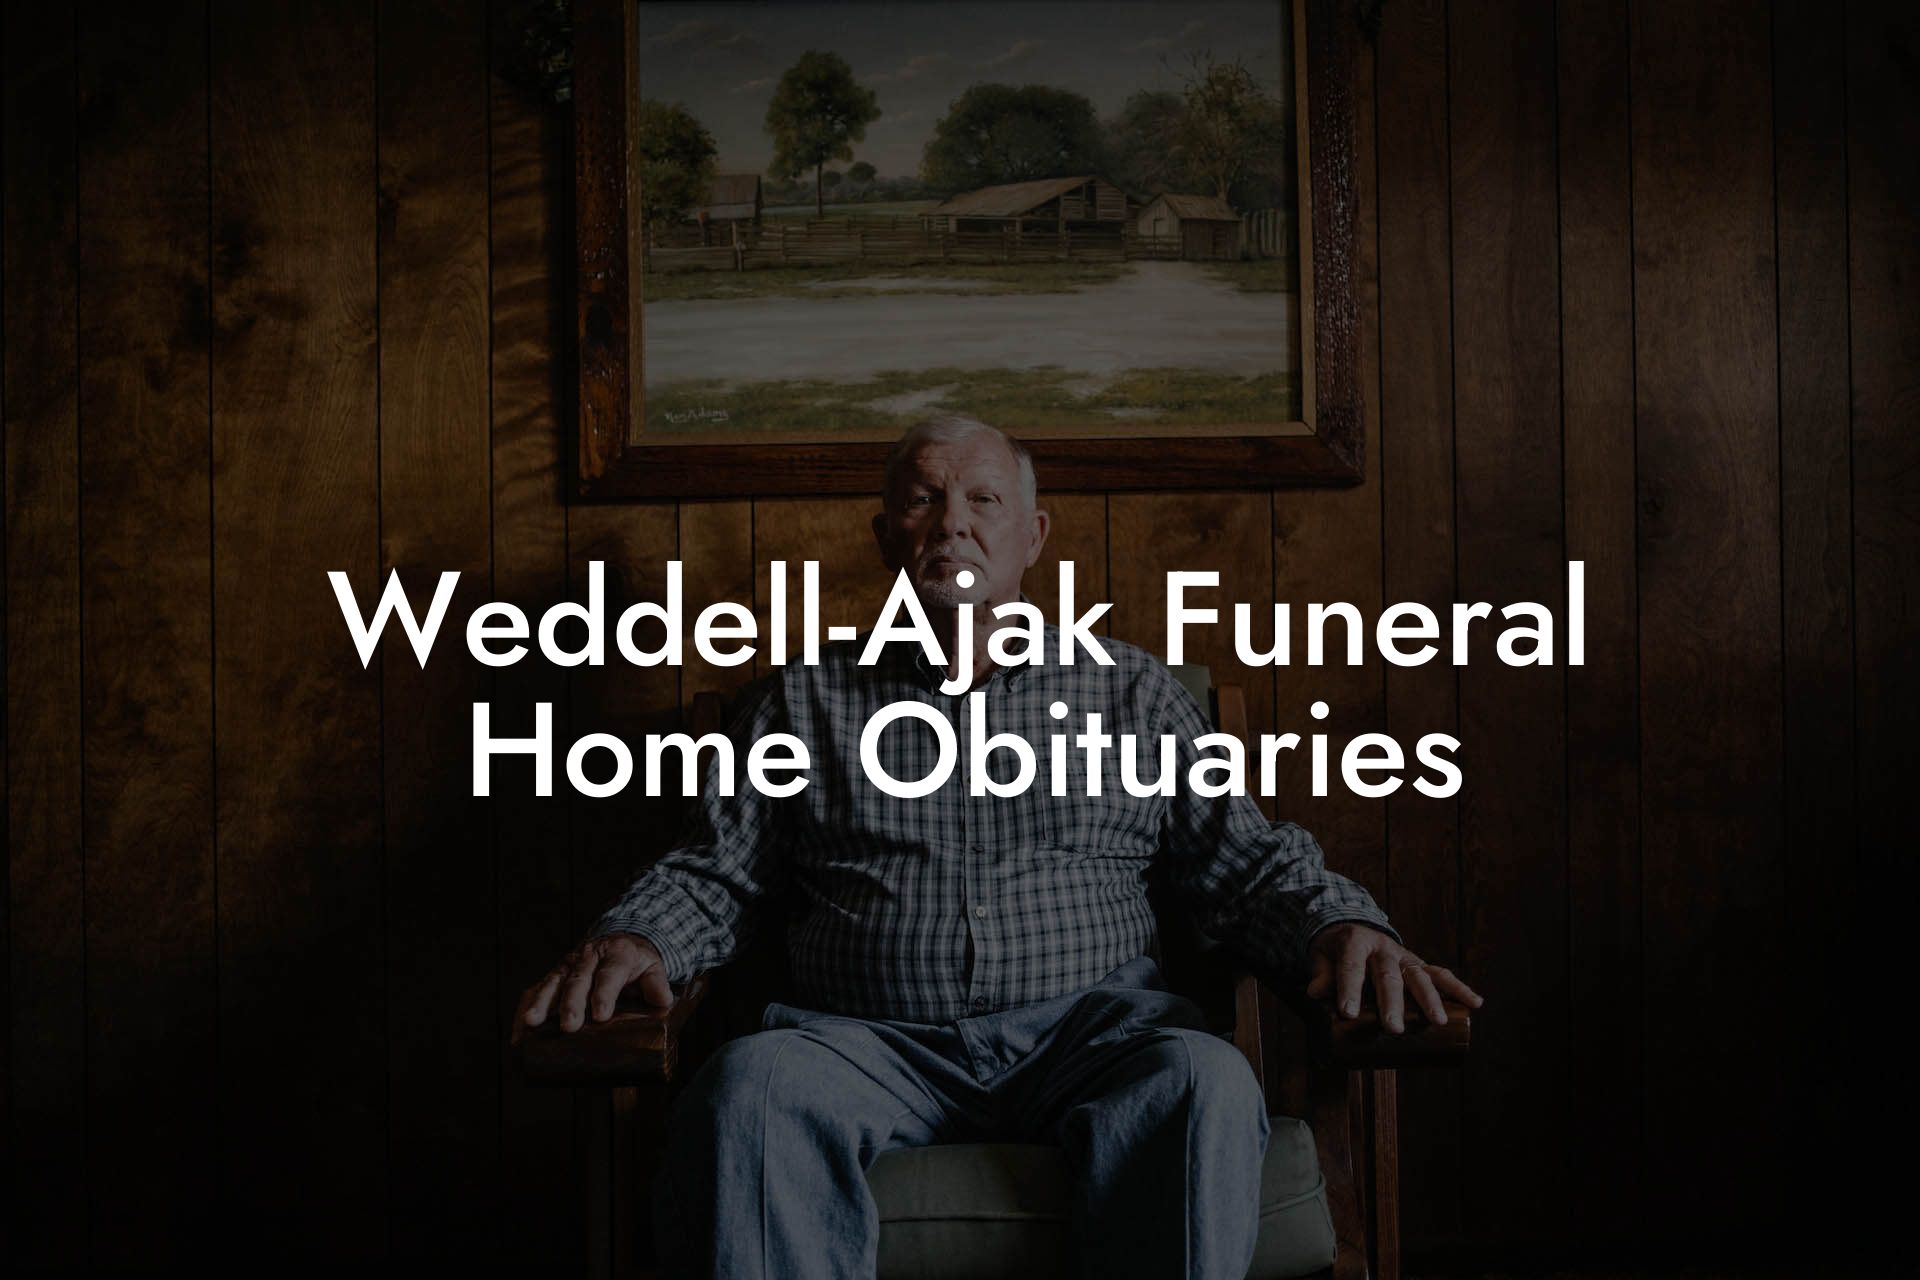 Weddell-Ajak Funeral Home Obituaries